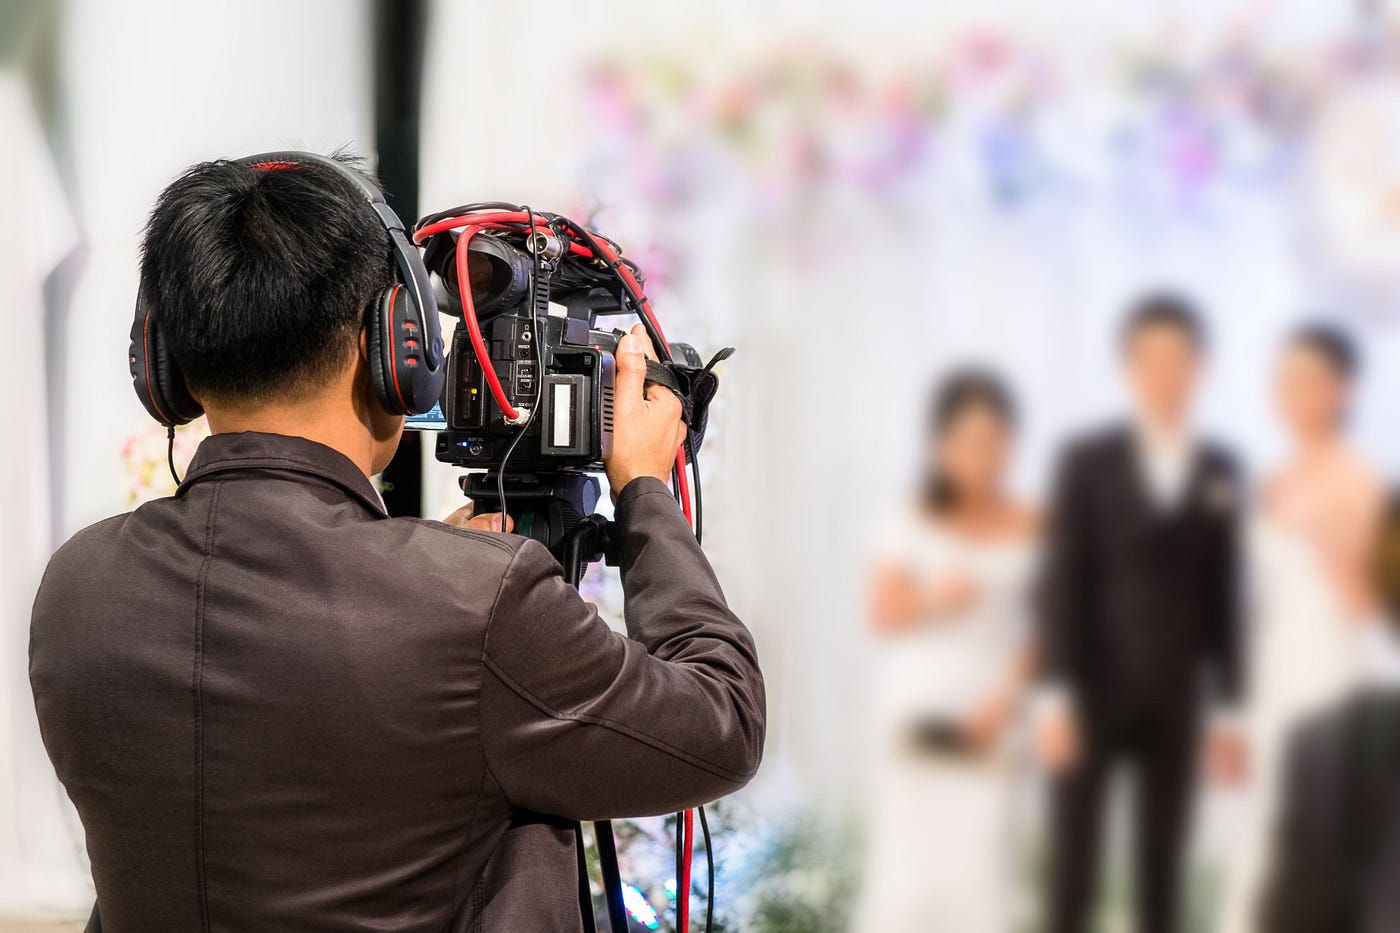 The Five Reasons You Should Hire a Videographer for Your Wedding